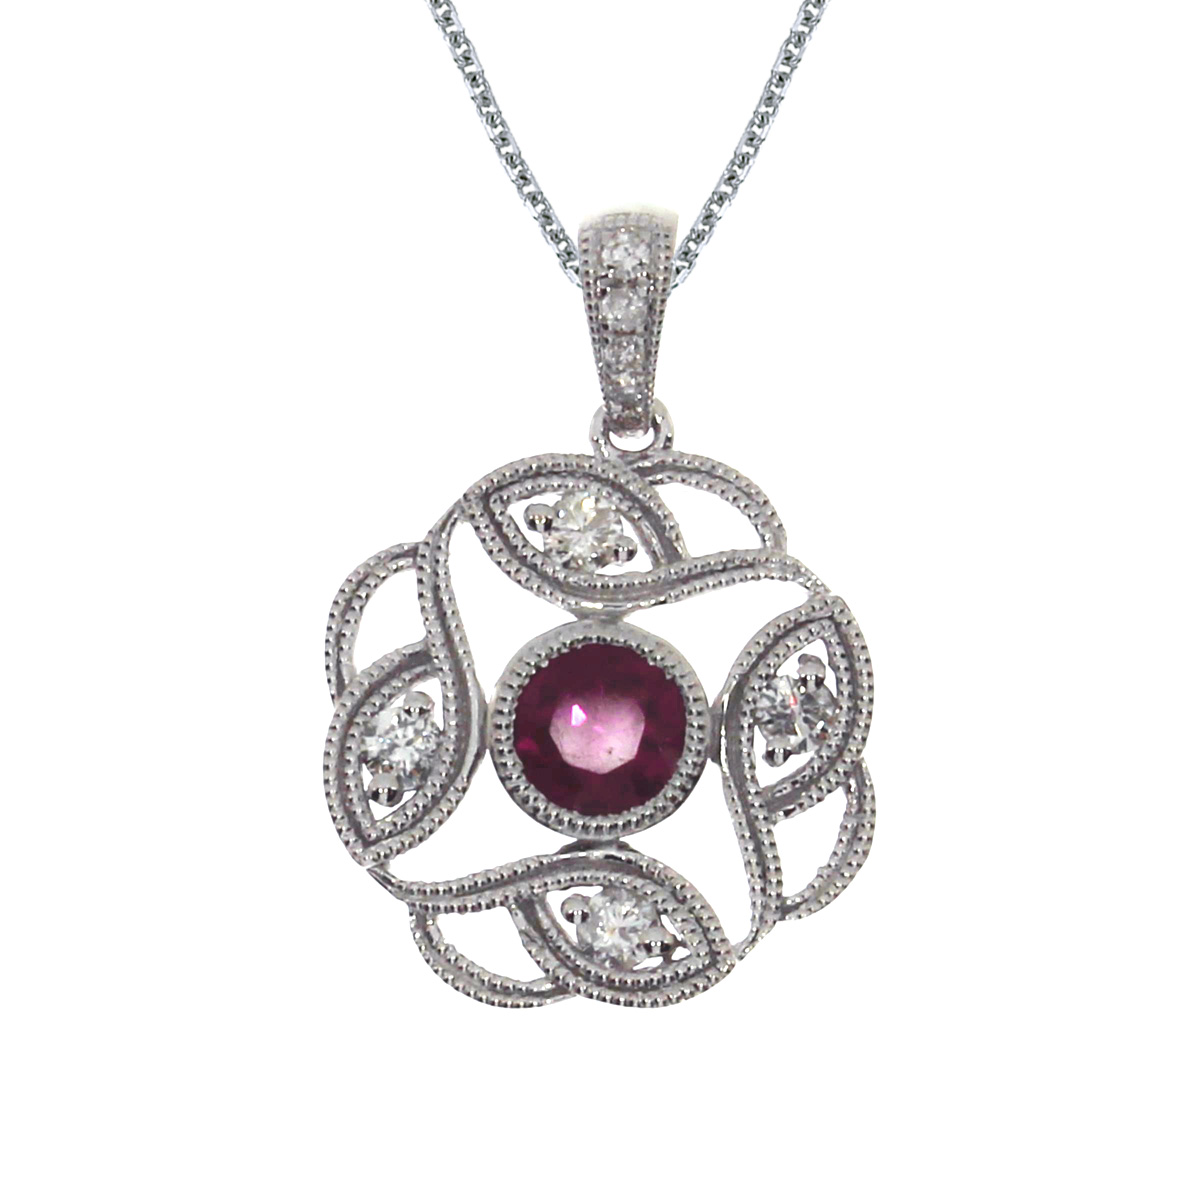 JCX2639: A genuine 5 mm ruby sits within the radiant 14k white gold pendant design with .12 ct diamonds.